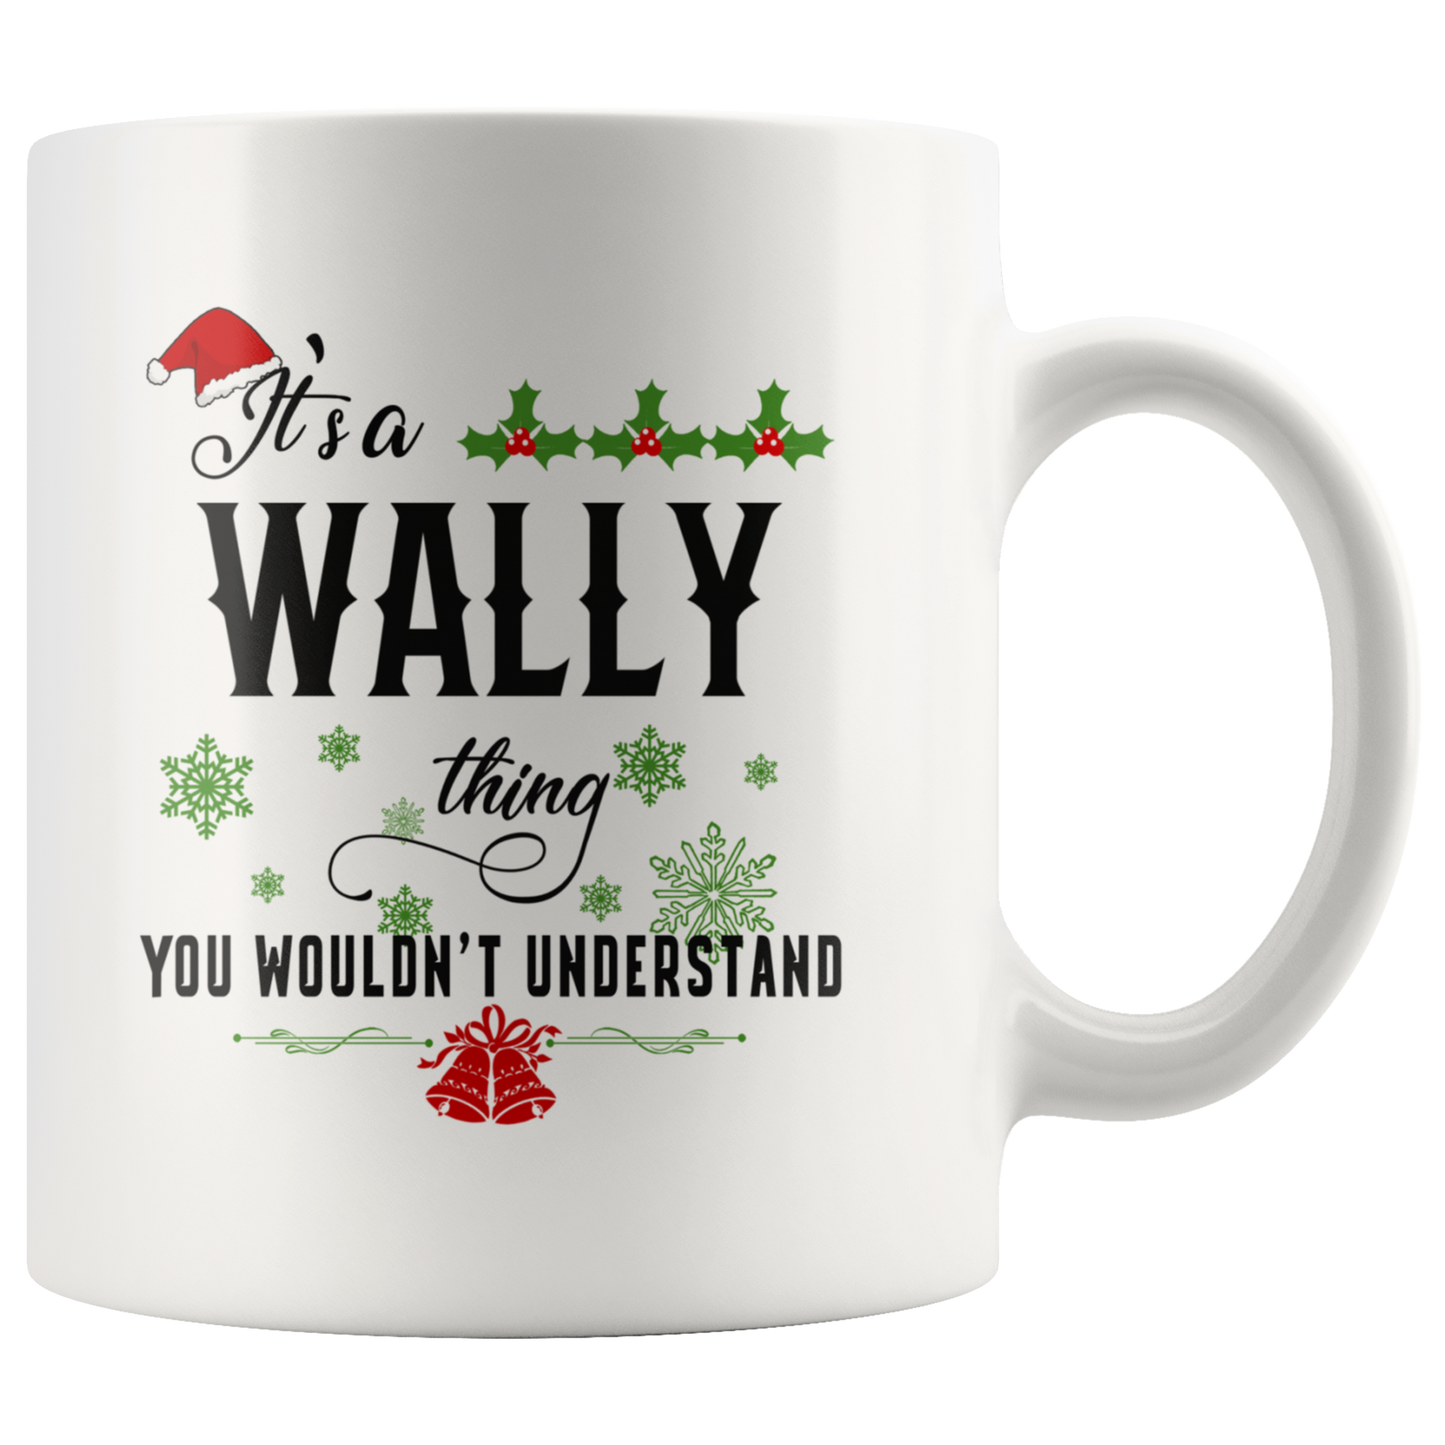 M-20331706-sp-19358 - Christmas Mug For Wally - Its a Wally Thing You Wouldnt Un